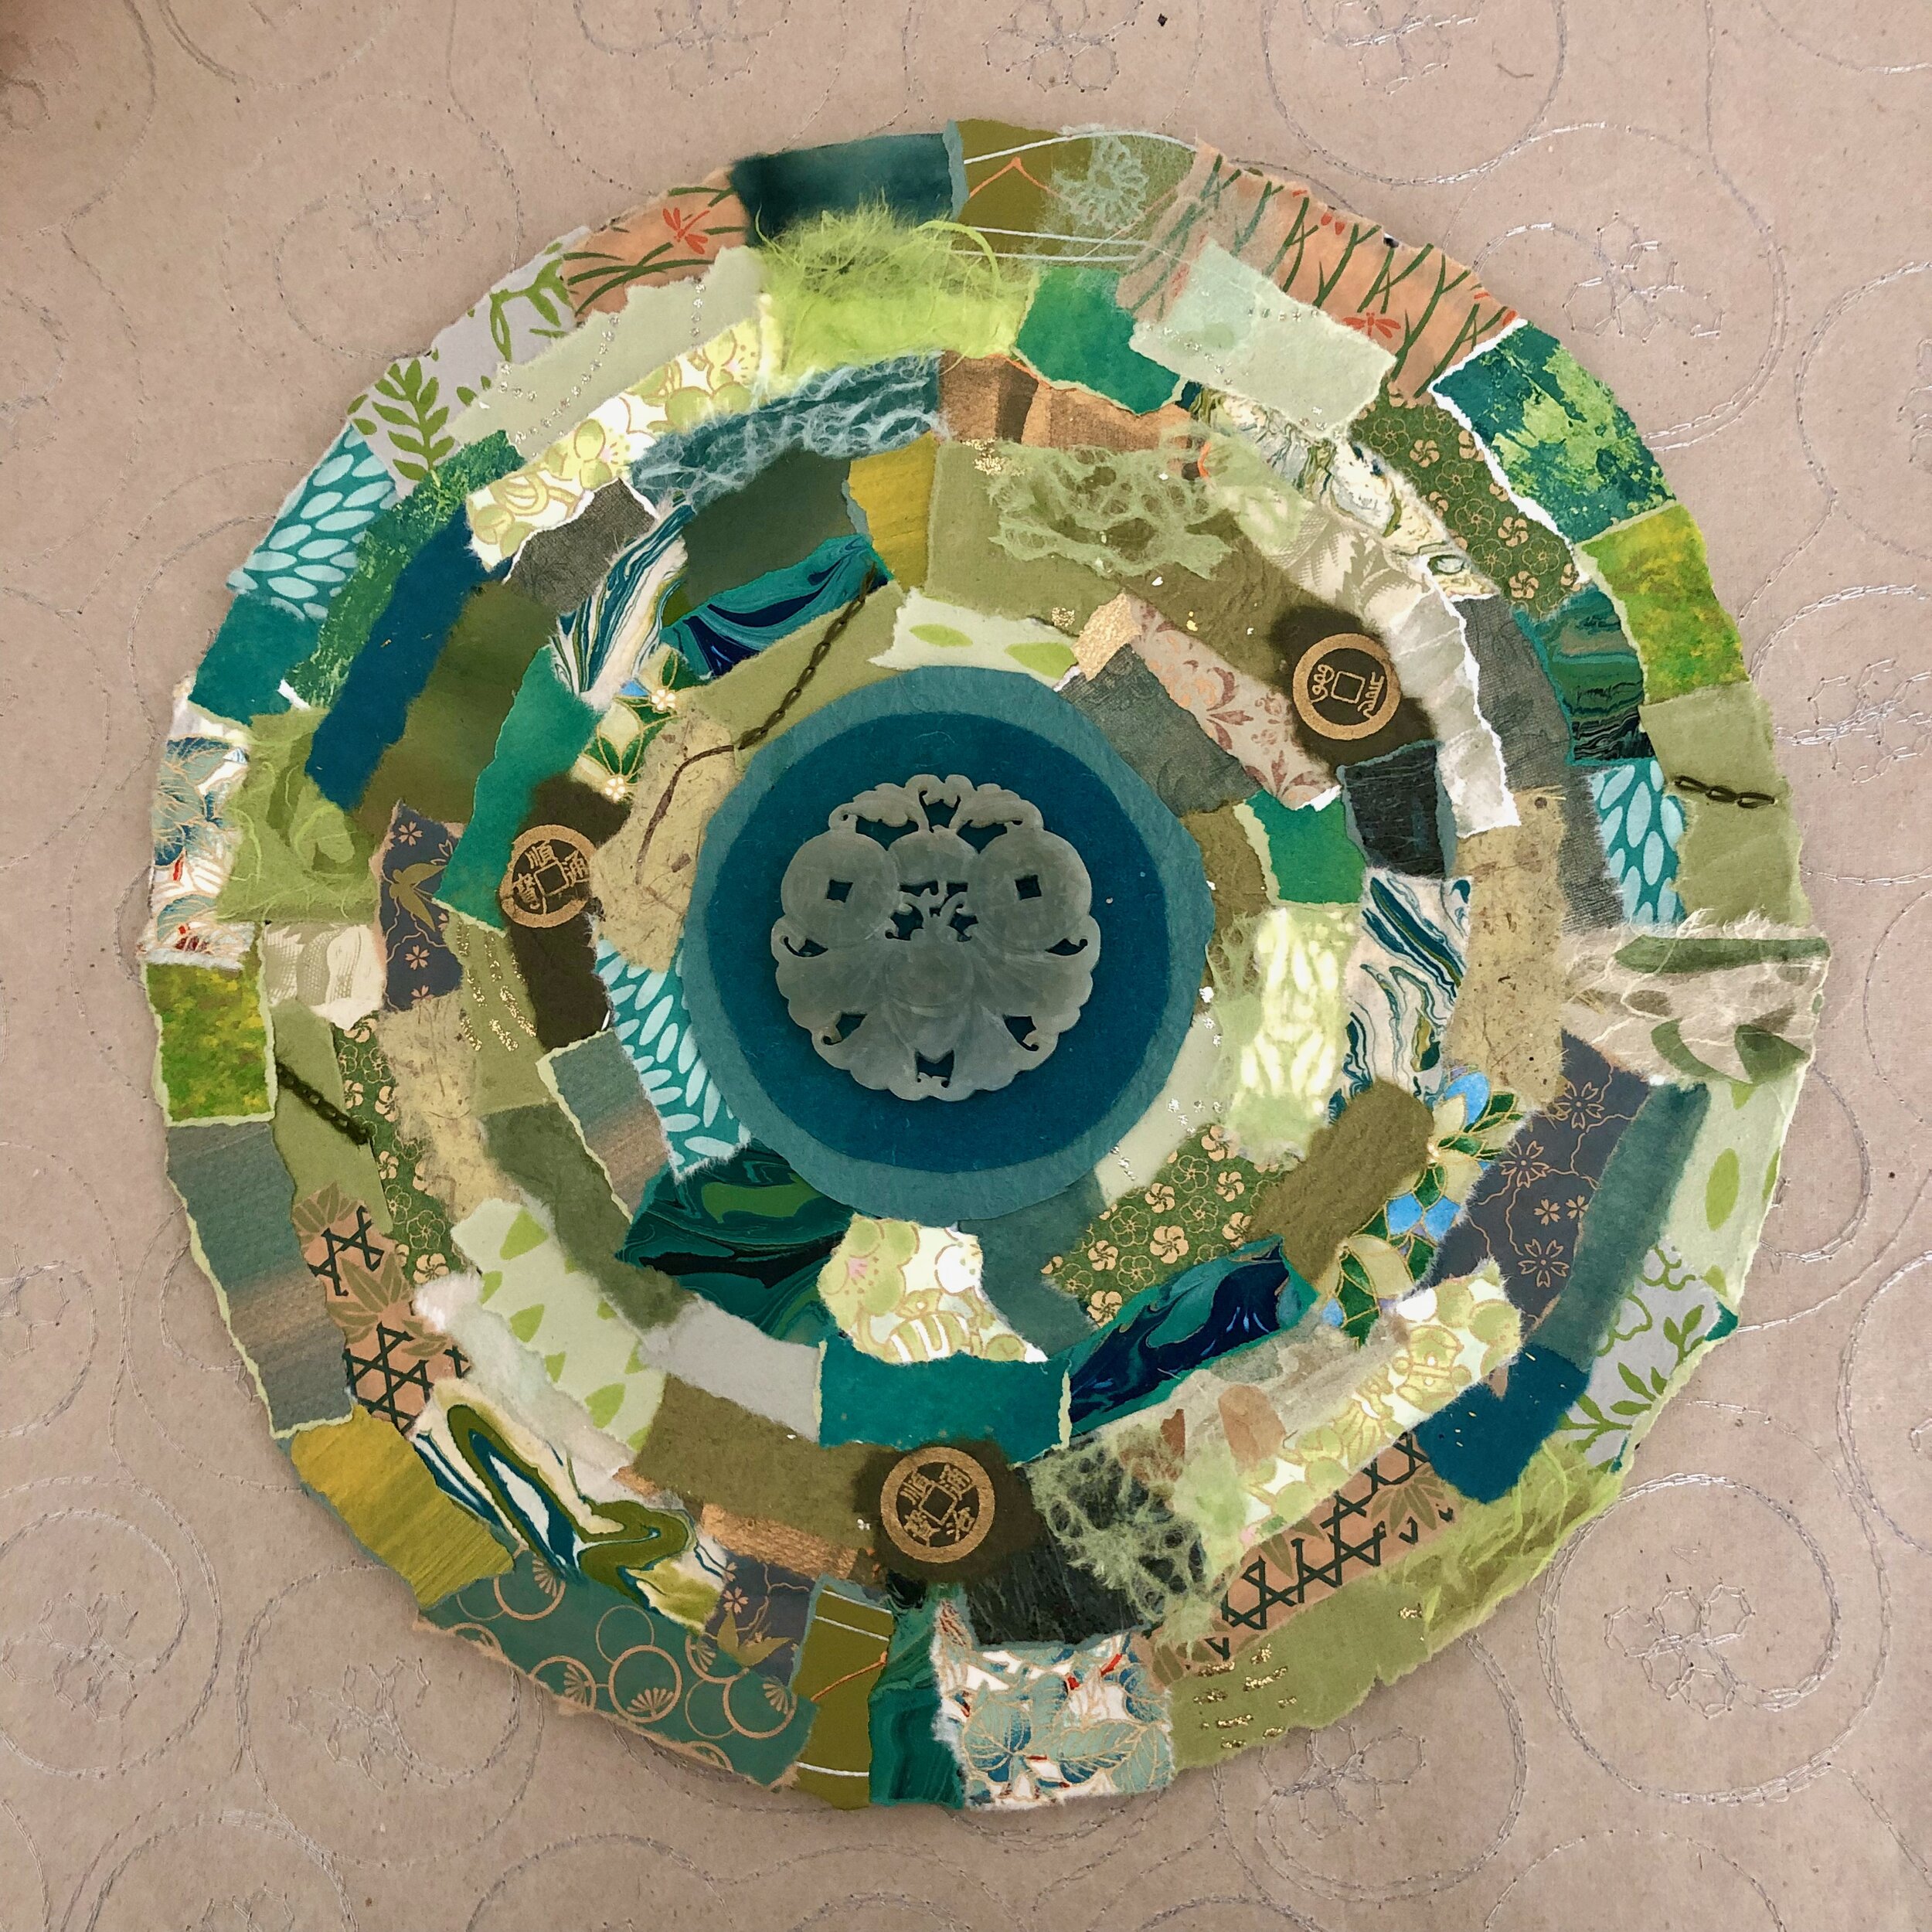 Labyrinth 19  Cut and torn fine papers; vintage jade piece   2019